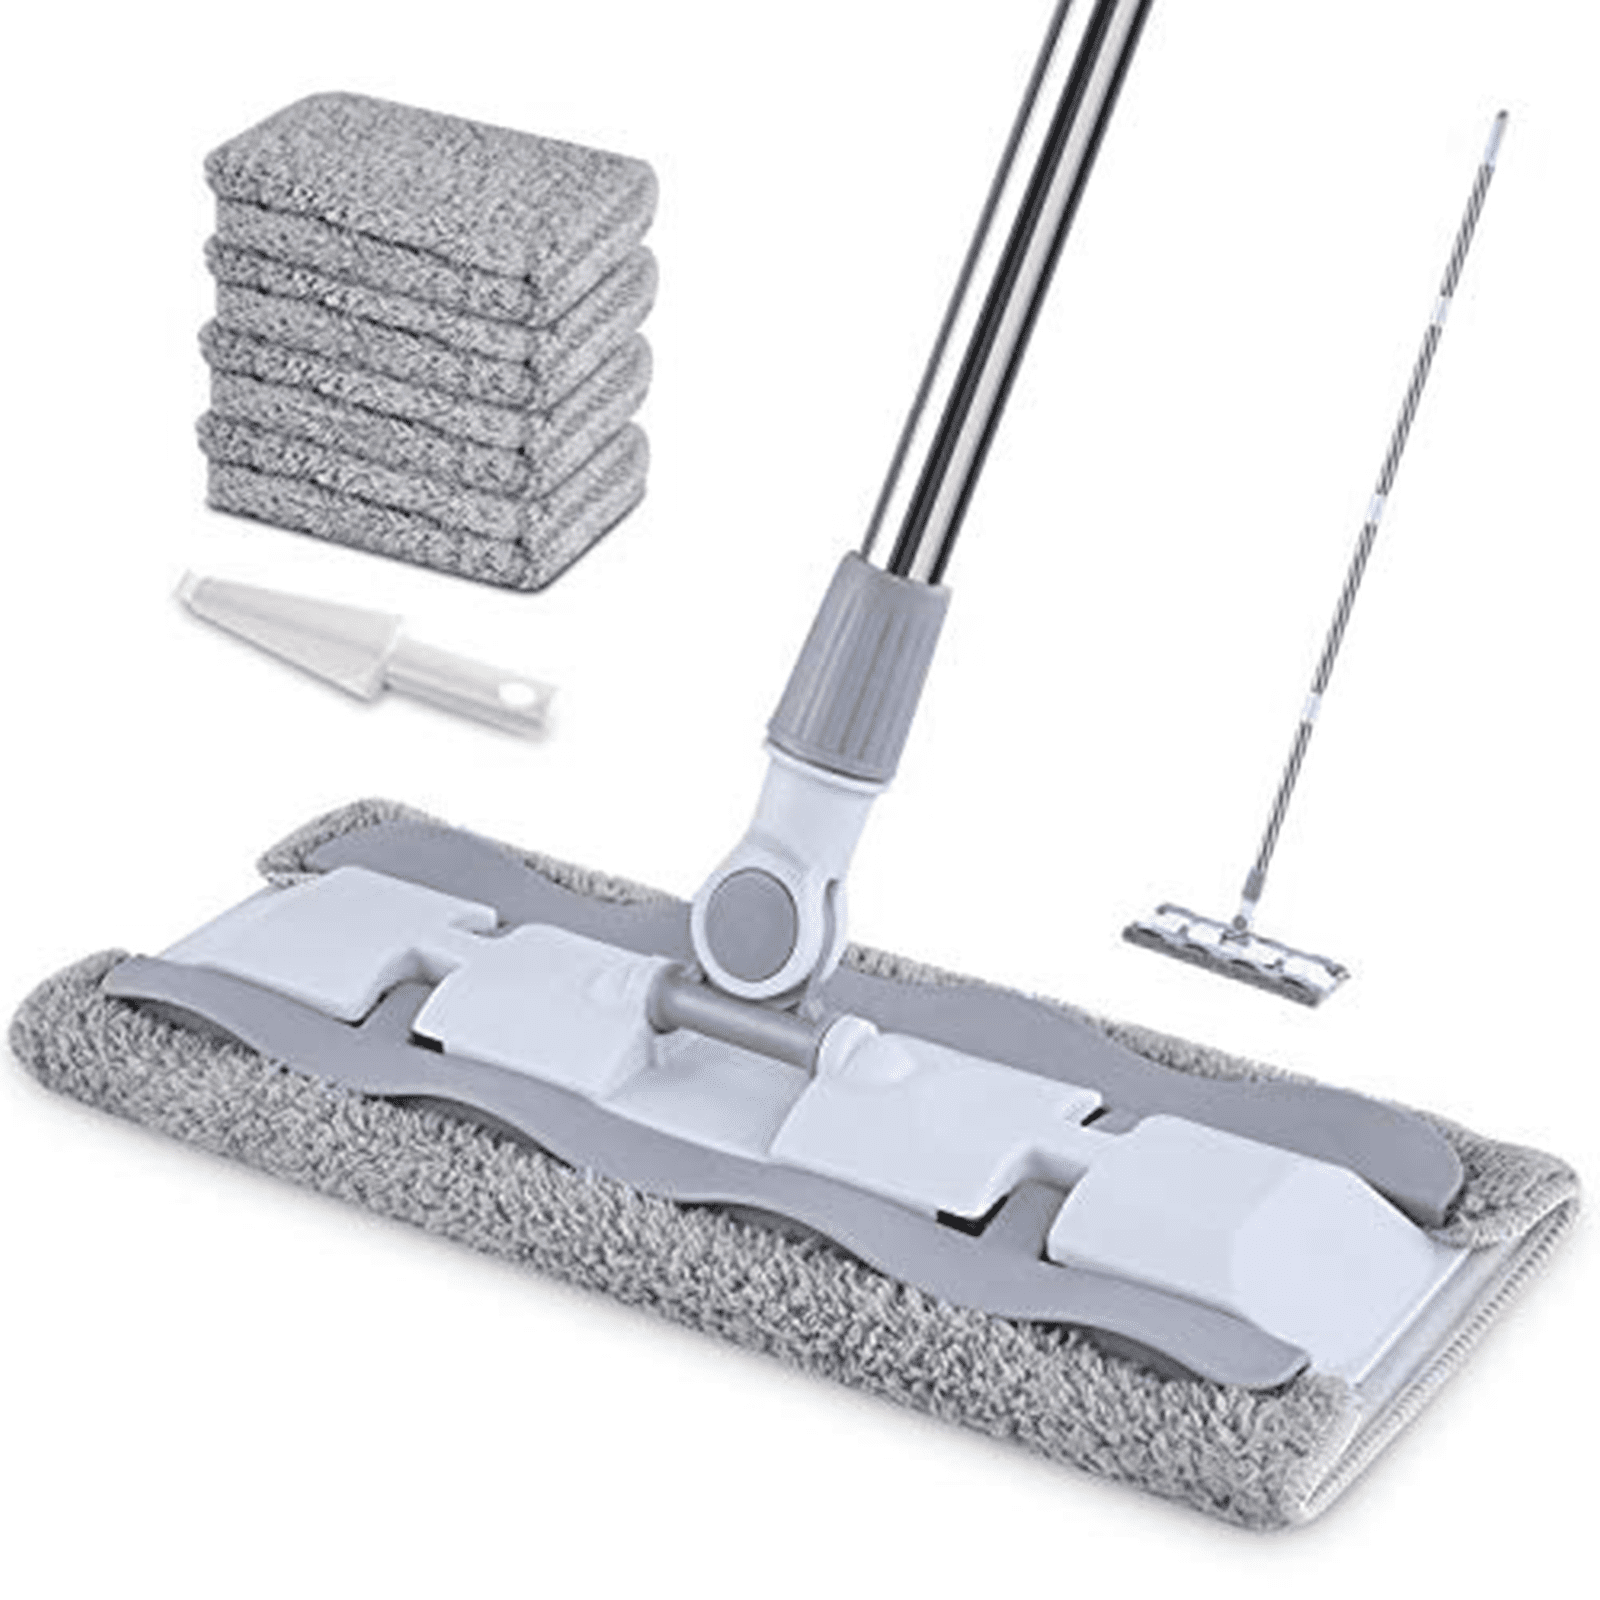 Self Cleaning and Drying Mop for Hard Floors Flat Mop 2/4/6/8 Pads UK Bucket 